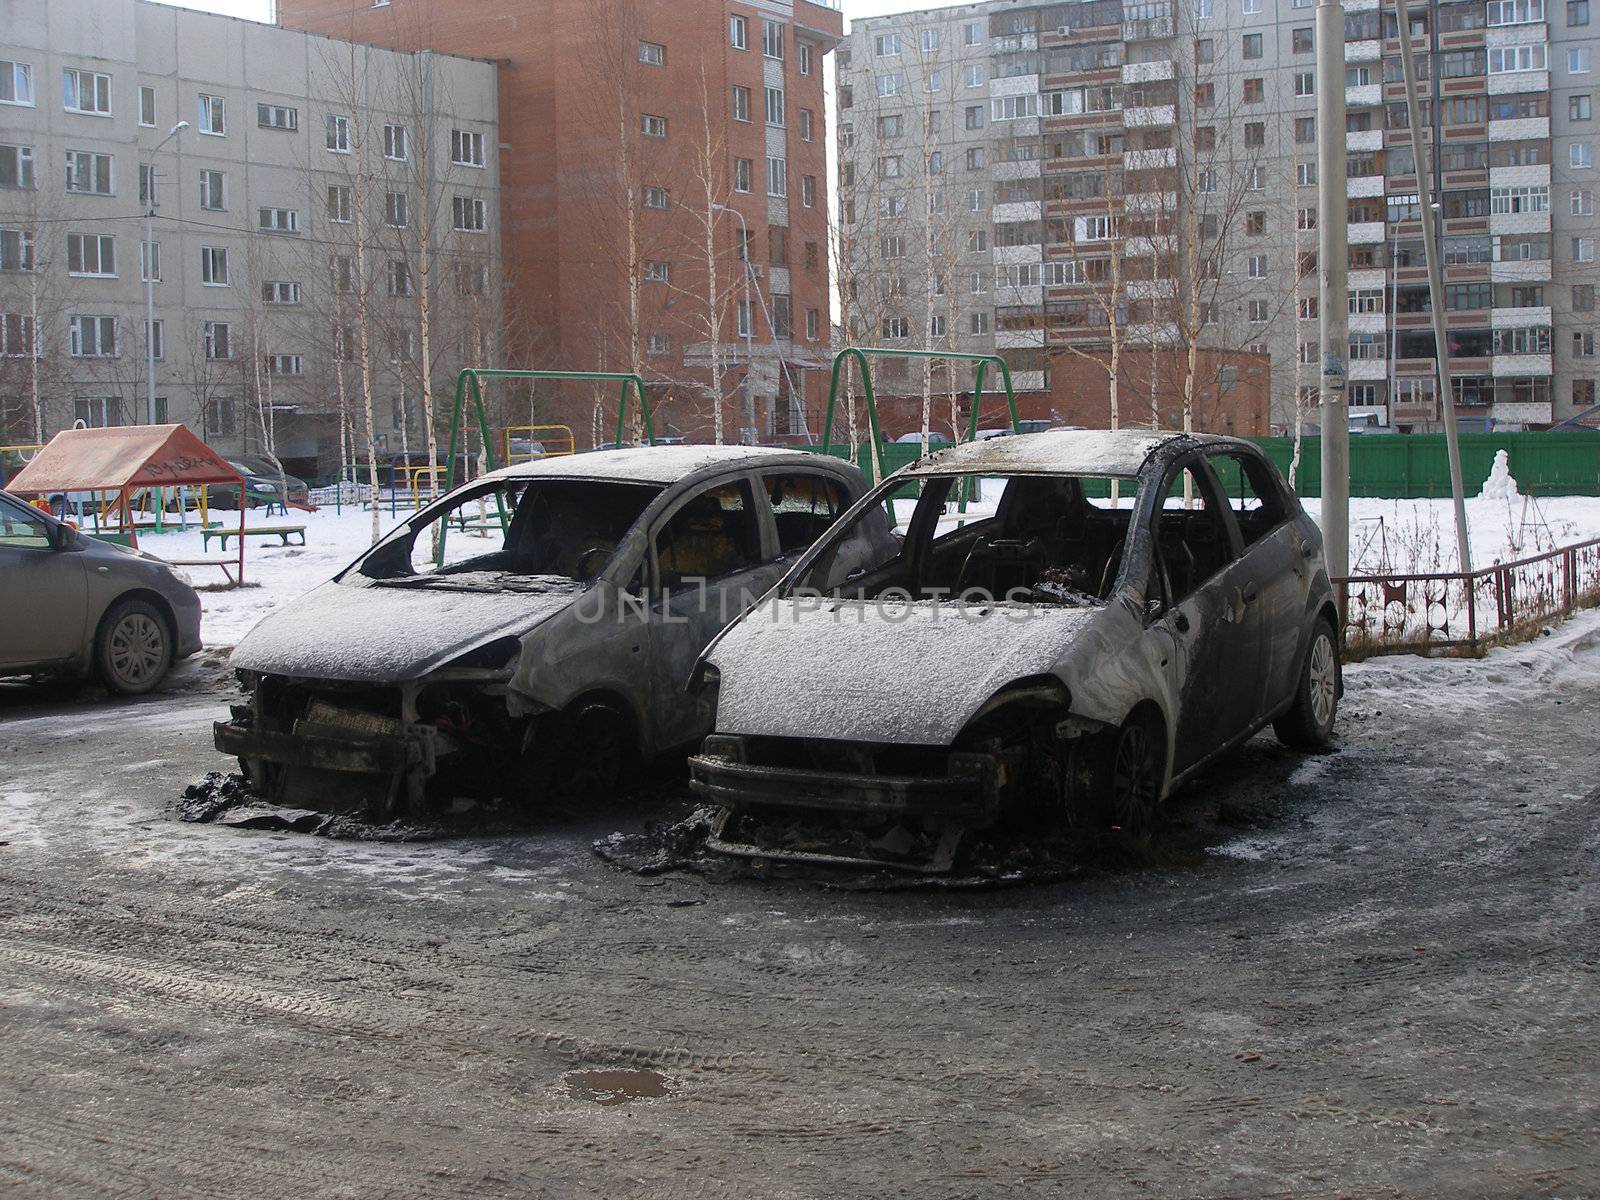 Have burnt down cars in a court yard